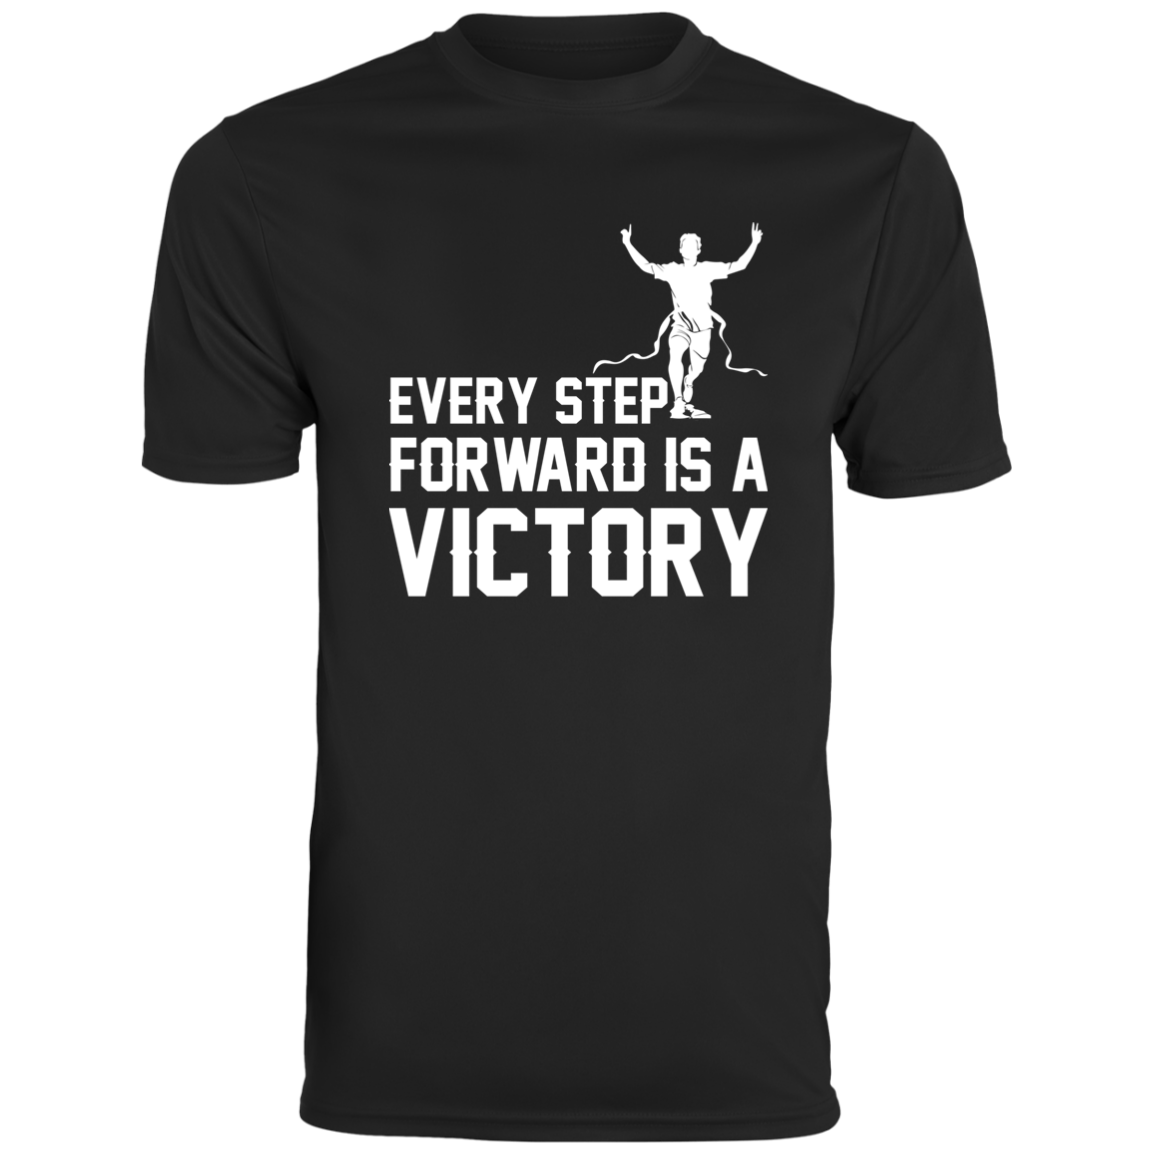 Men's Inspirational Top Every step forward is a victory